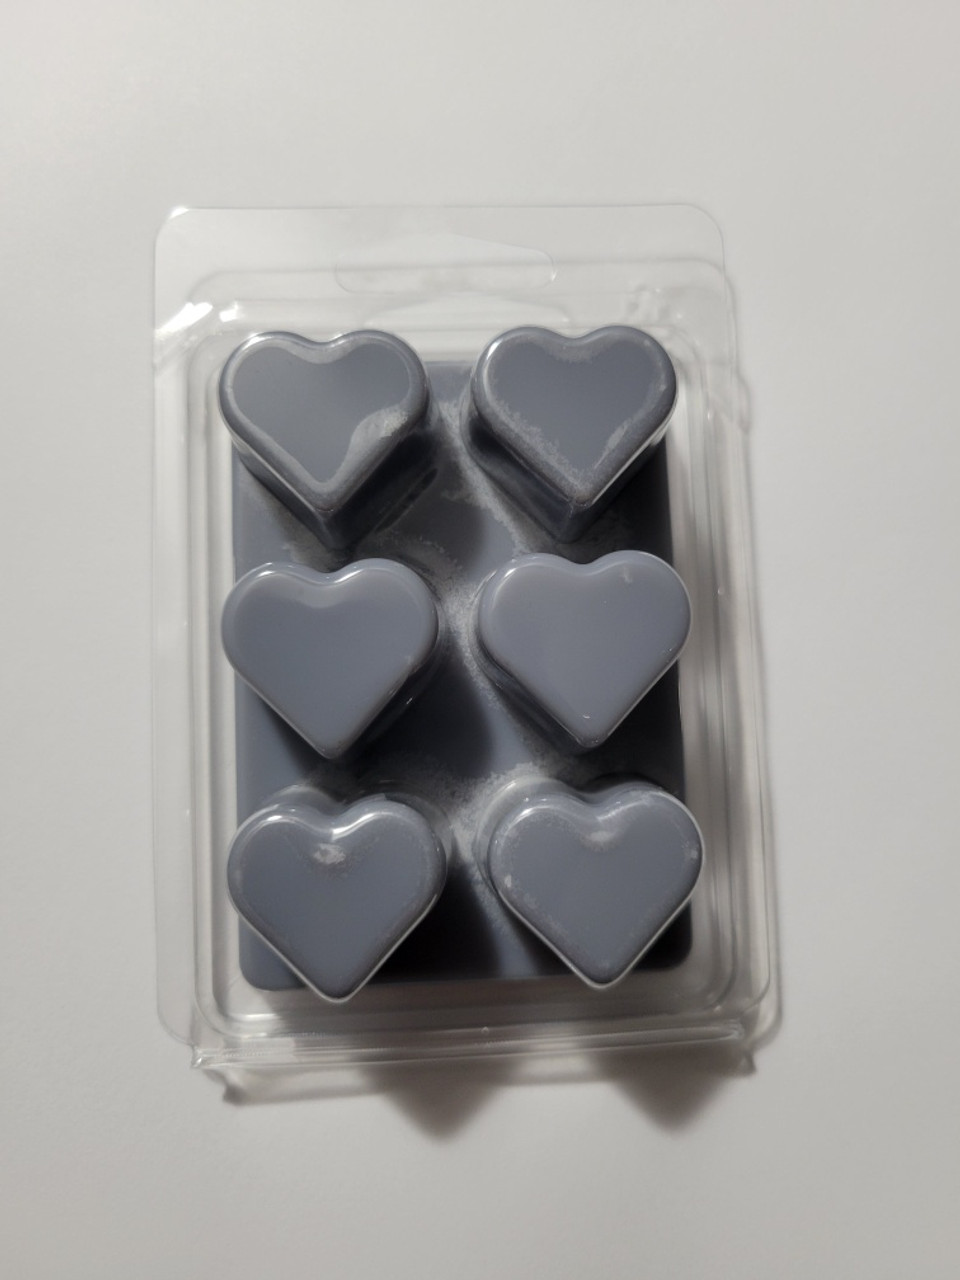 Sneaky Frog's Darkness Heart Shaped Scented Natural Soy Wax Wax Melts.  Nordic Nights & Midsummer's Night Scents, Black Sneaky Frog's T-Shirt (Large), Koozies, Stickers w/ a Gift Bag.